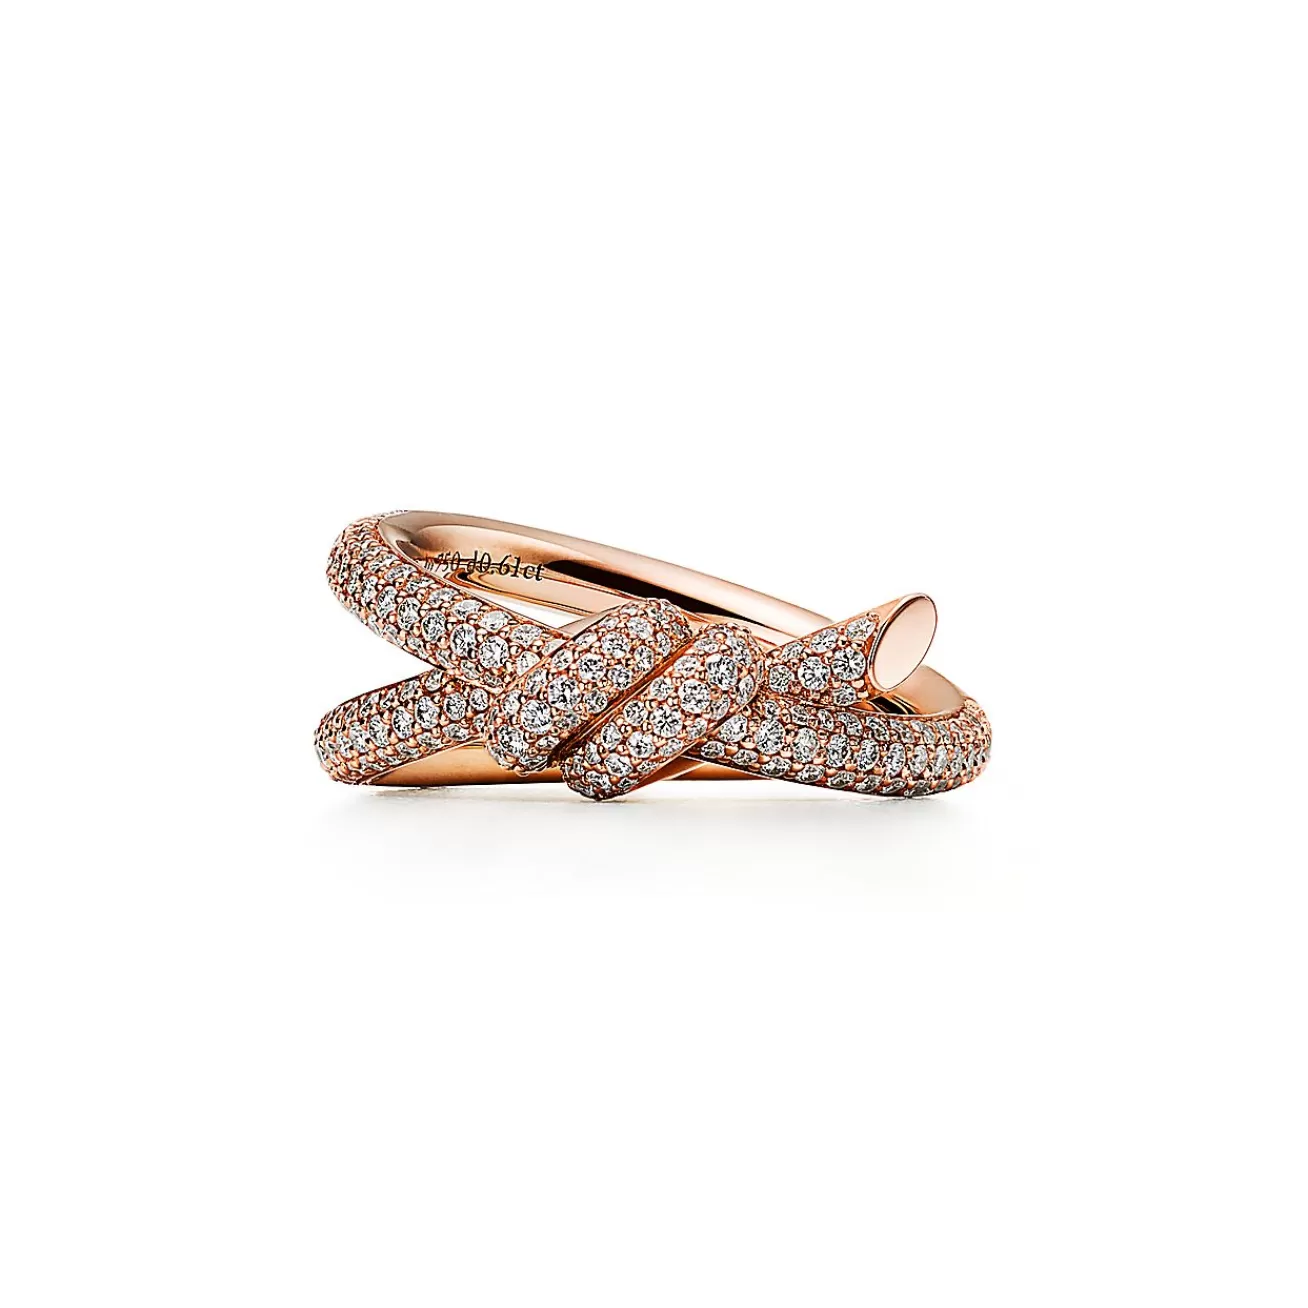 Tiffany & Co. Tiffany Knot Double Row Ring in Rose Gold with Diamonds | ^ Rings | Rose Gold Jewelry